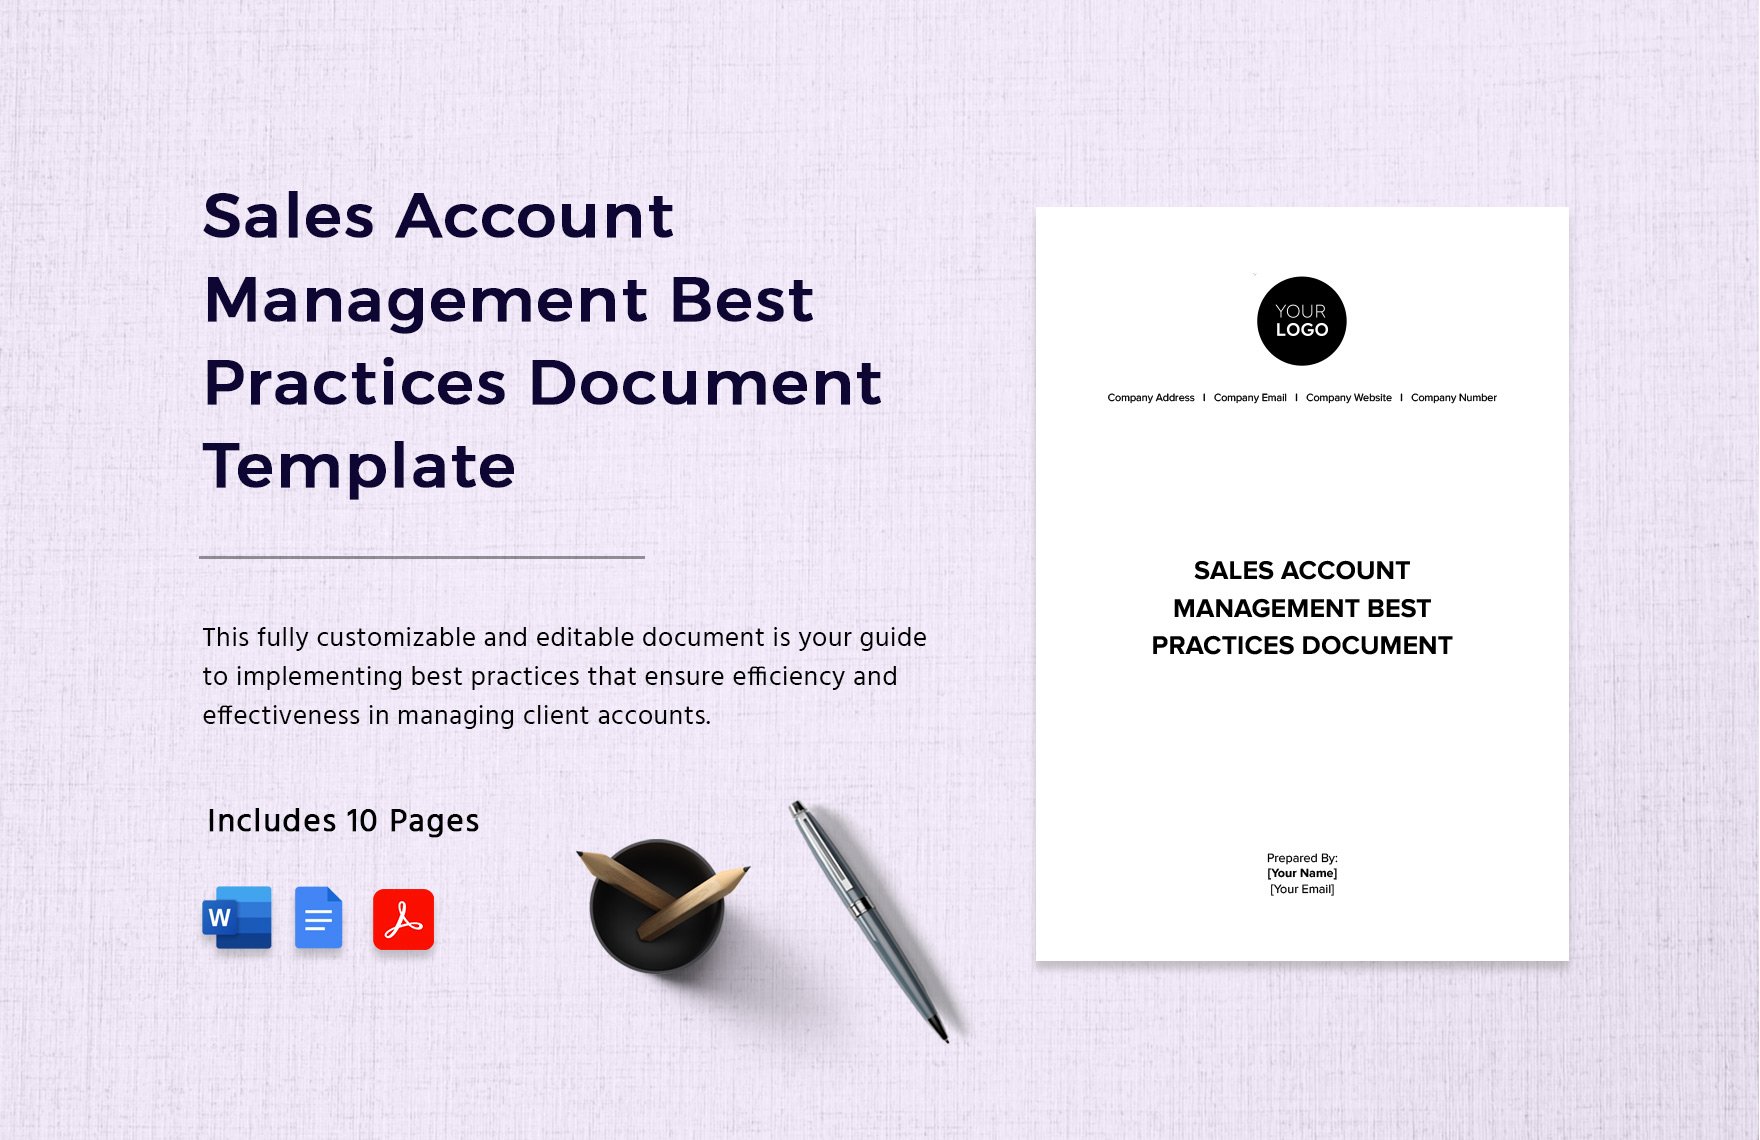 Sales Account Management Best Practices Document Template in Word, Google Docs, PDF